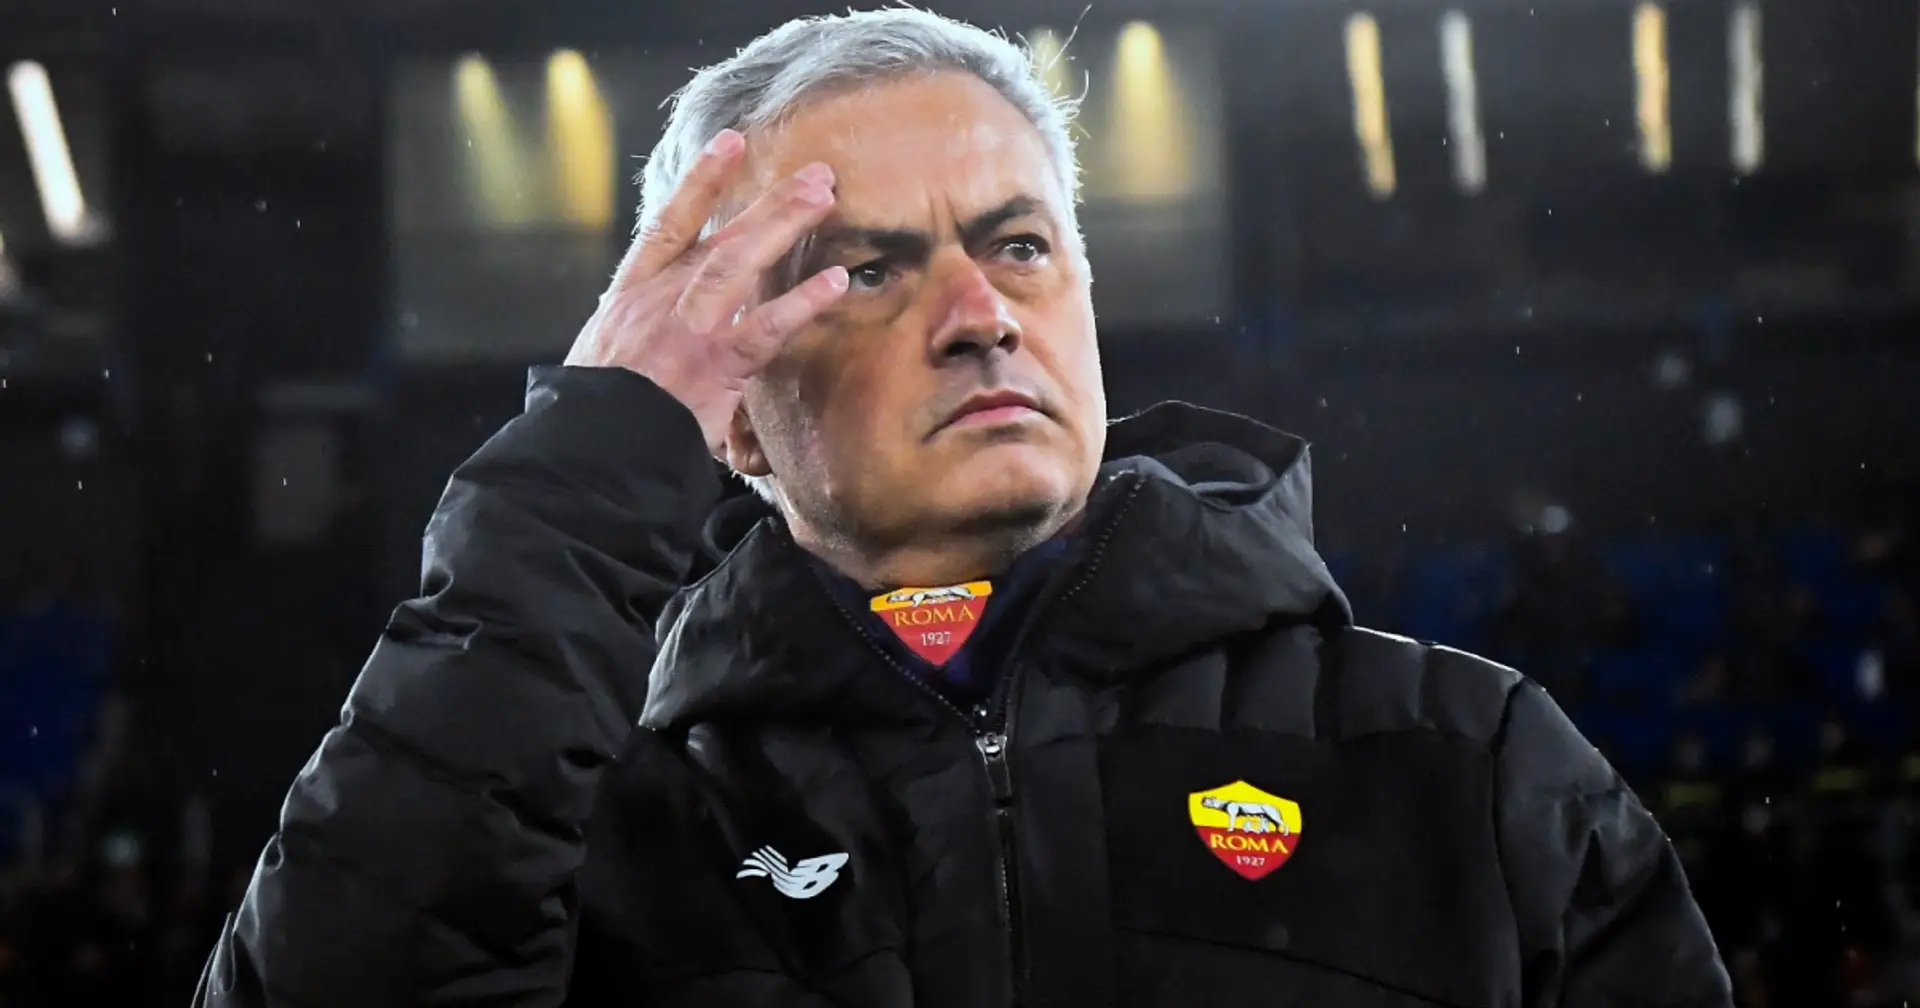 'It's not possible to work normally with him': Ex-Roma director reveals Mourinho's standards for staff 